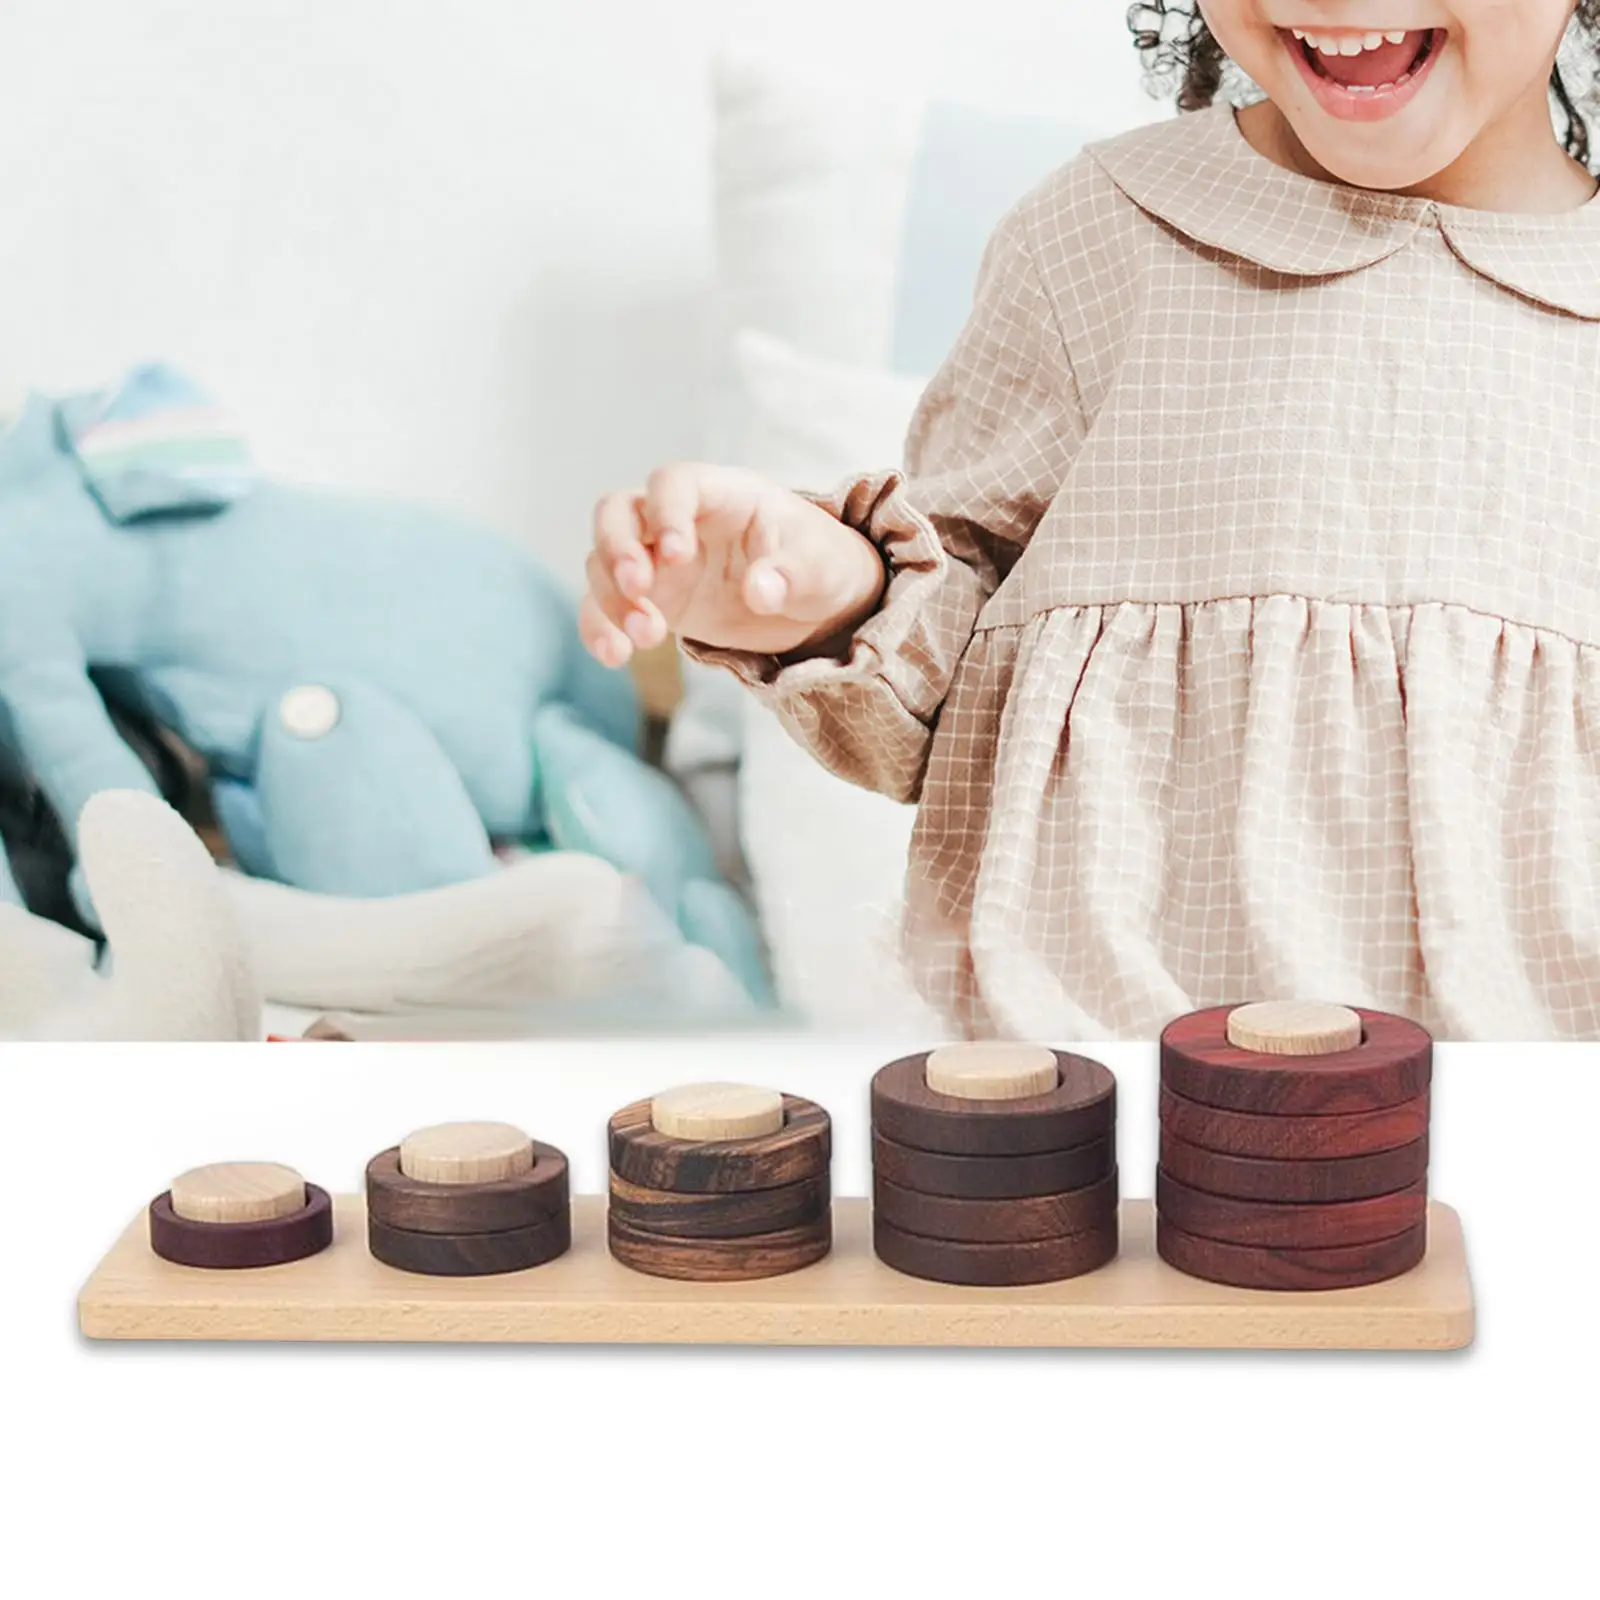 Wooden Stacking Toys Developmental Toy Early Educational Learning Toy Preschool Learning Toys for Kids Children Holiday Gifts